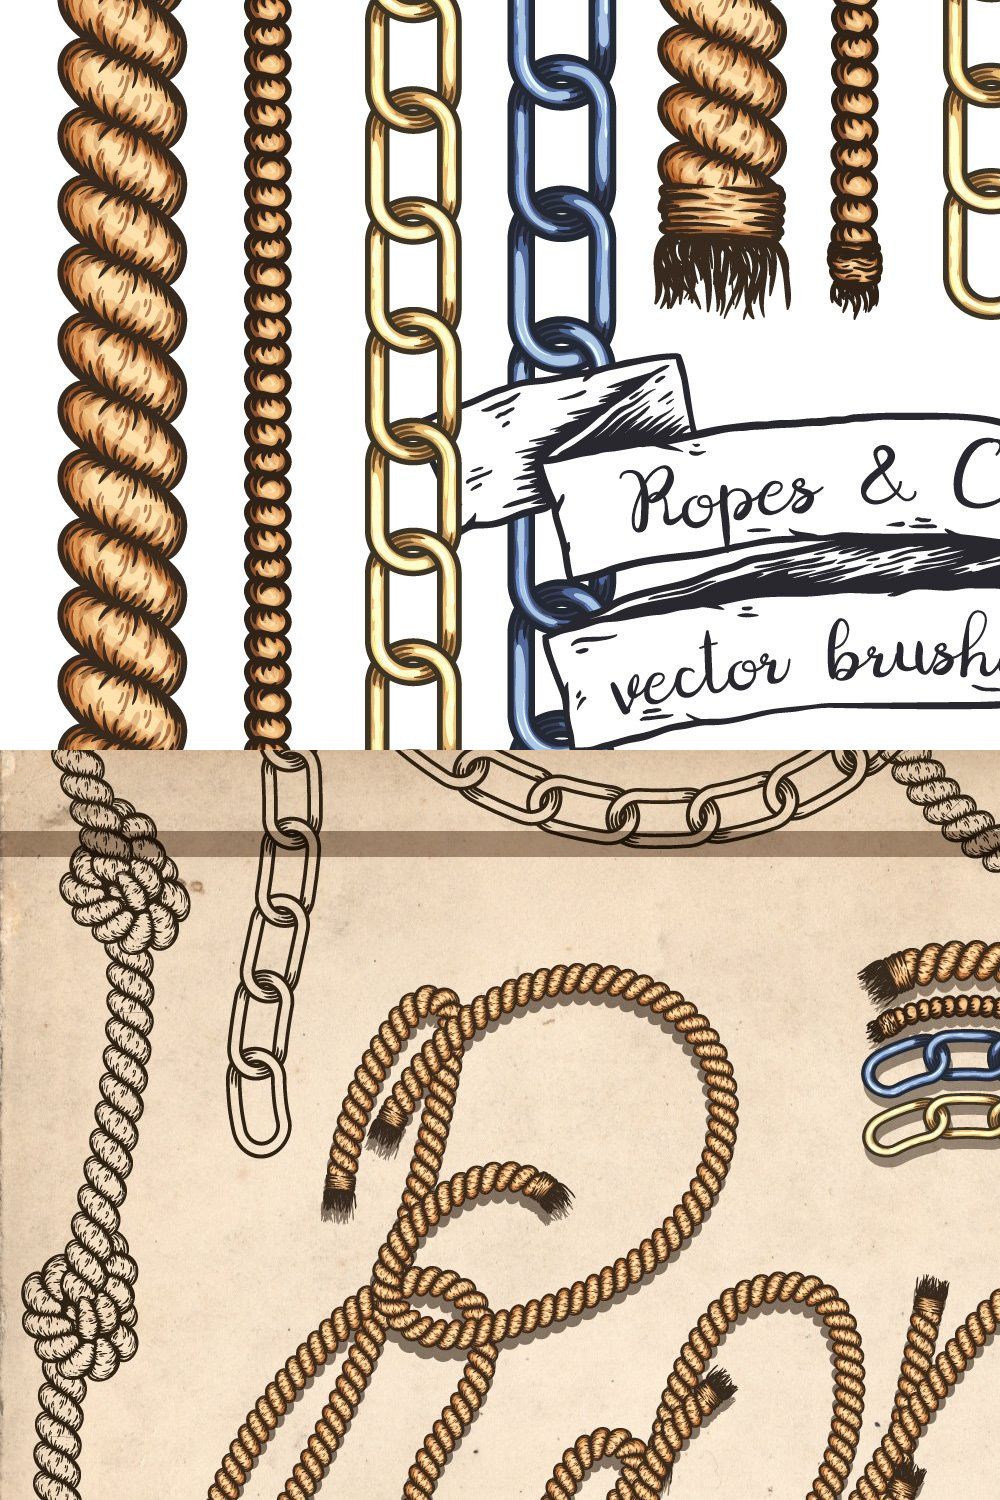 Ropes and Chains. Vector brushes. pinterest preview image.